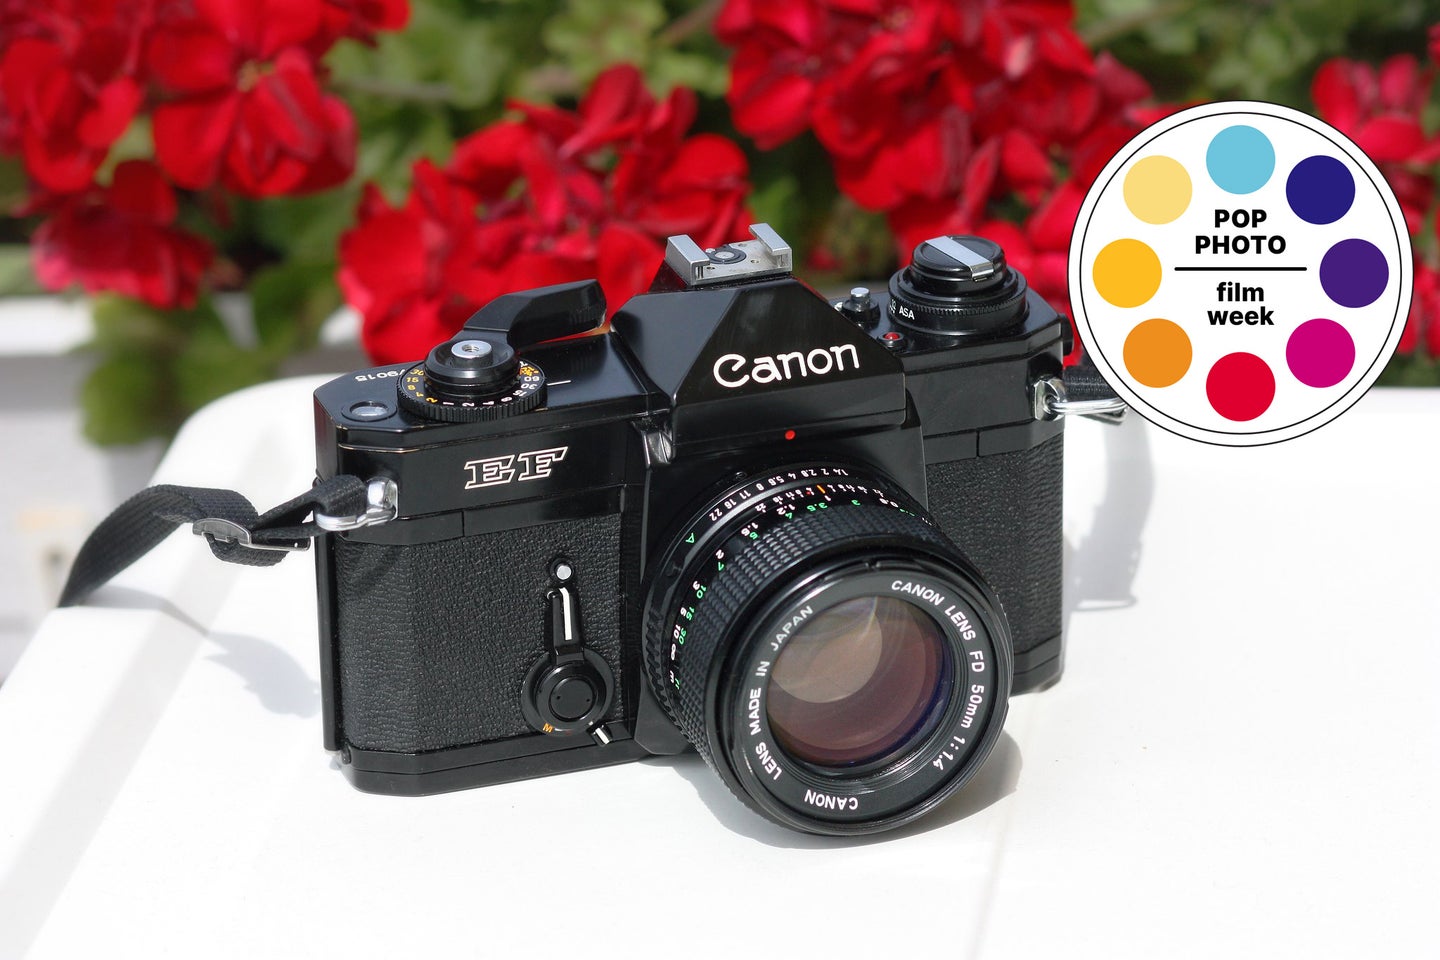 A canon film camera sitting on a white ledge with red flowers behind it.